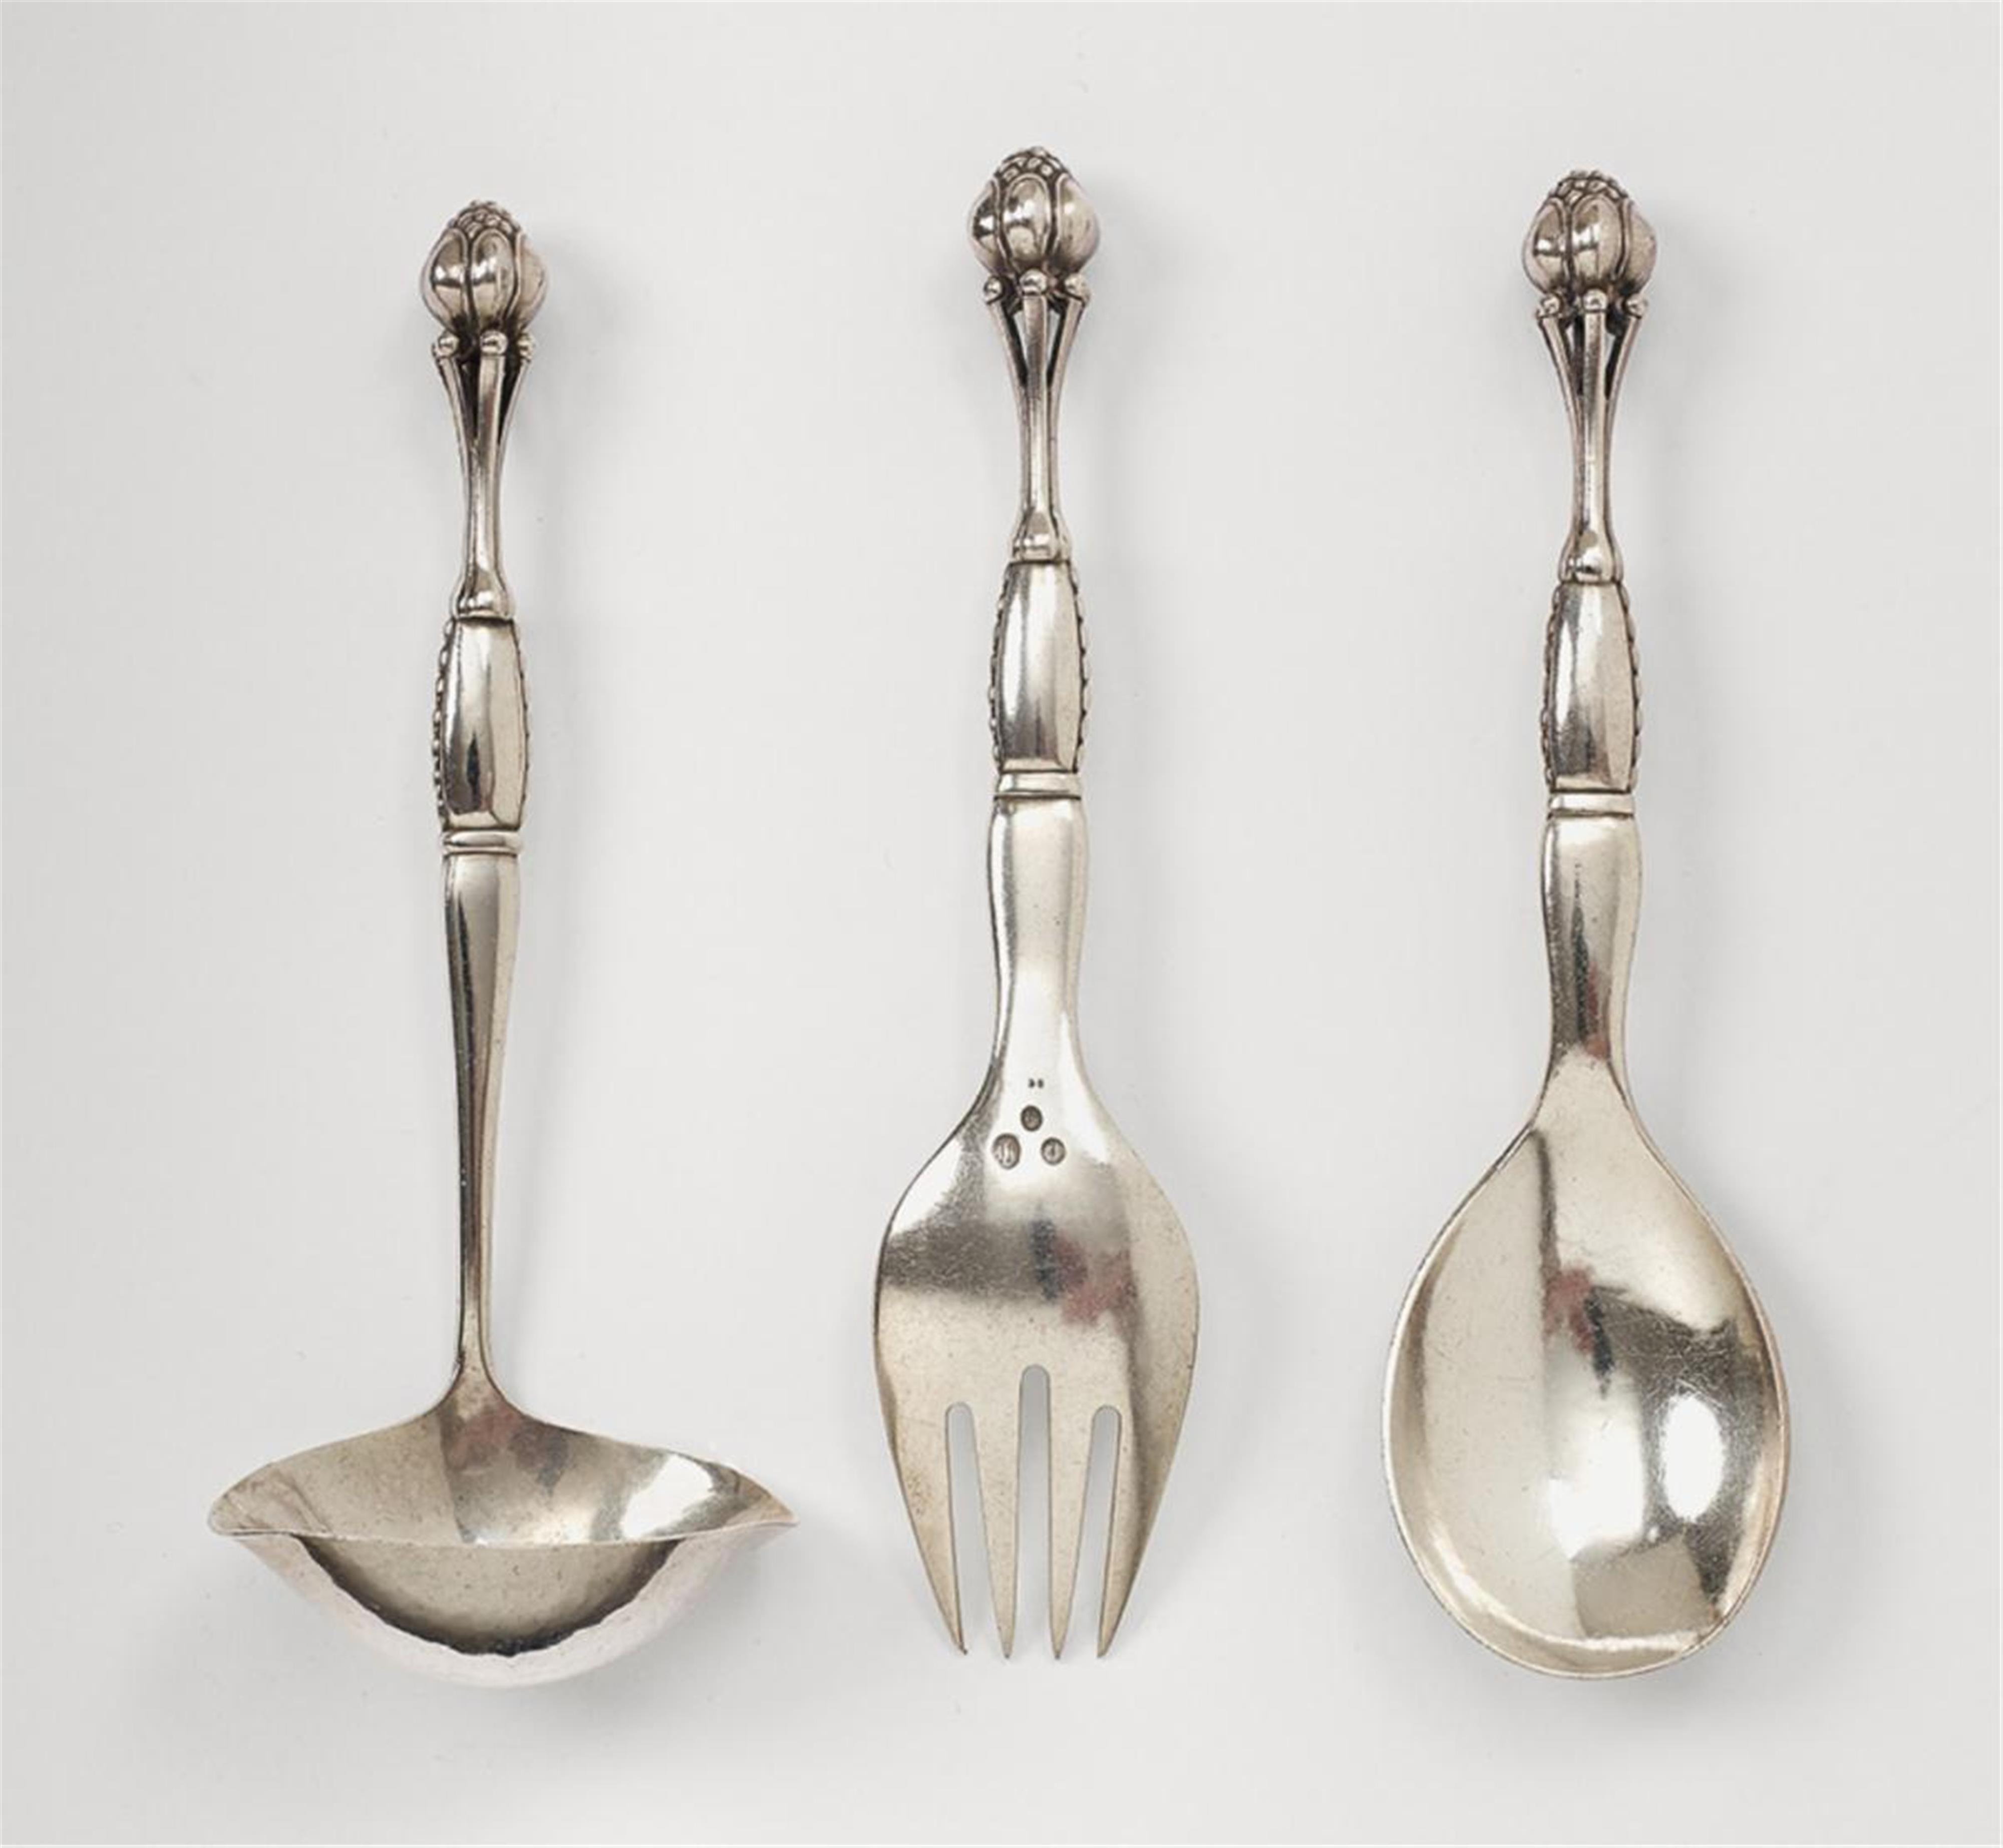 Three silver serving pieces no. 38. Comprising sauce ladle, serving spoon and fork. Marks of Georg Jensen, designed in 1912, made from 1927 - 30. - image-1